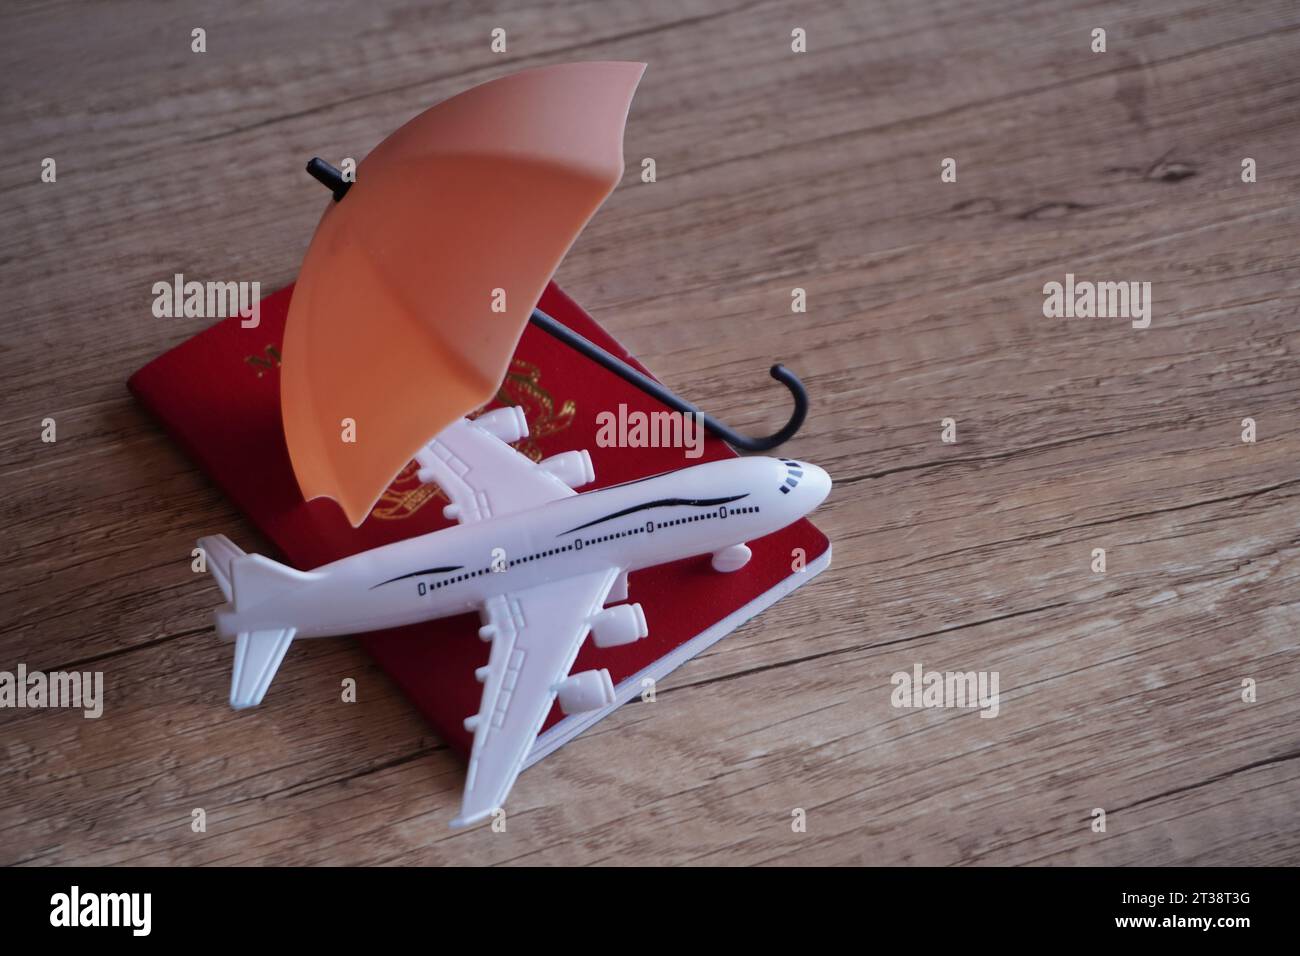 Closeup image of toy plane, passport and umbrella on table with copy space. Travel insurance concept. Stock Photo